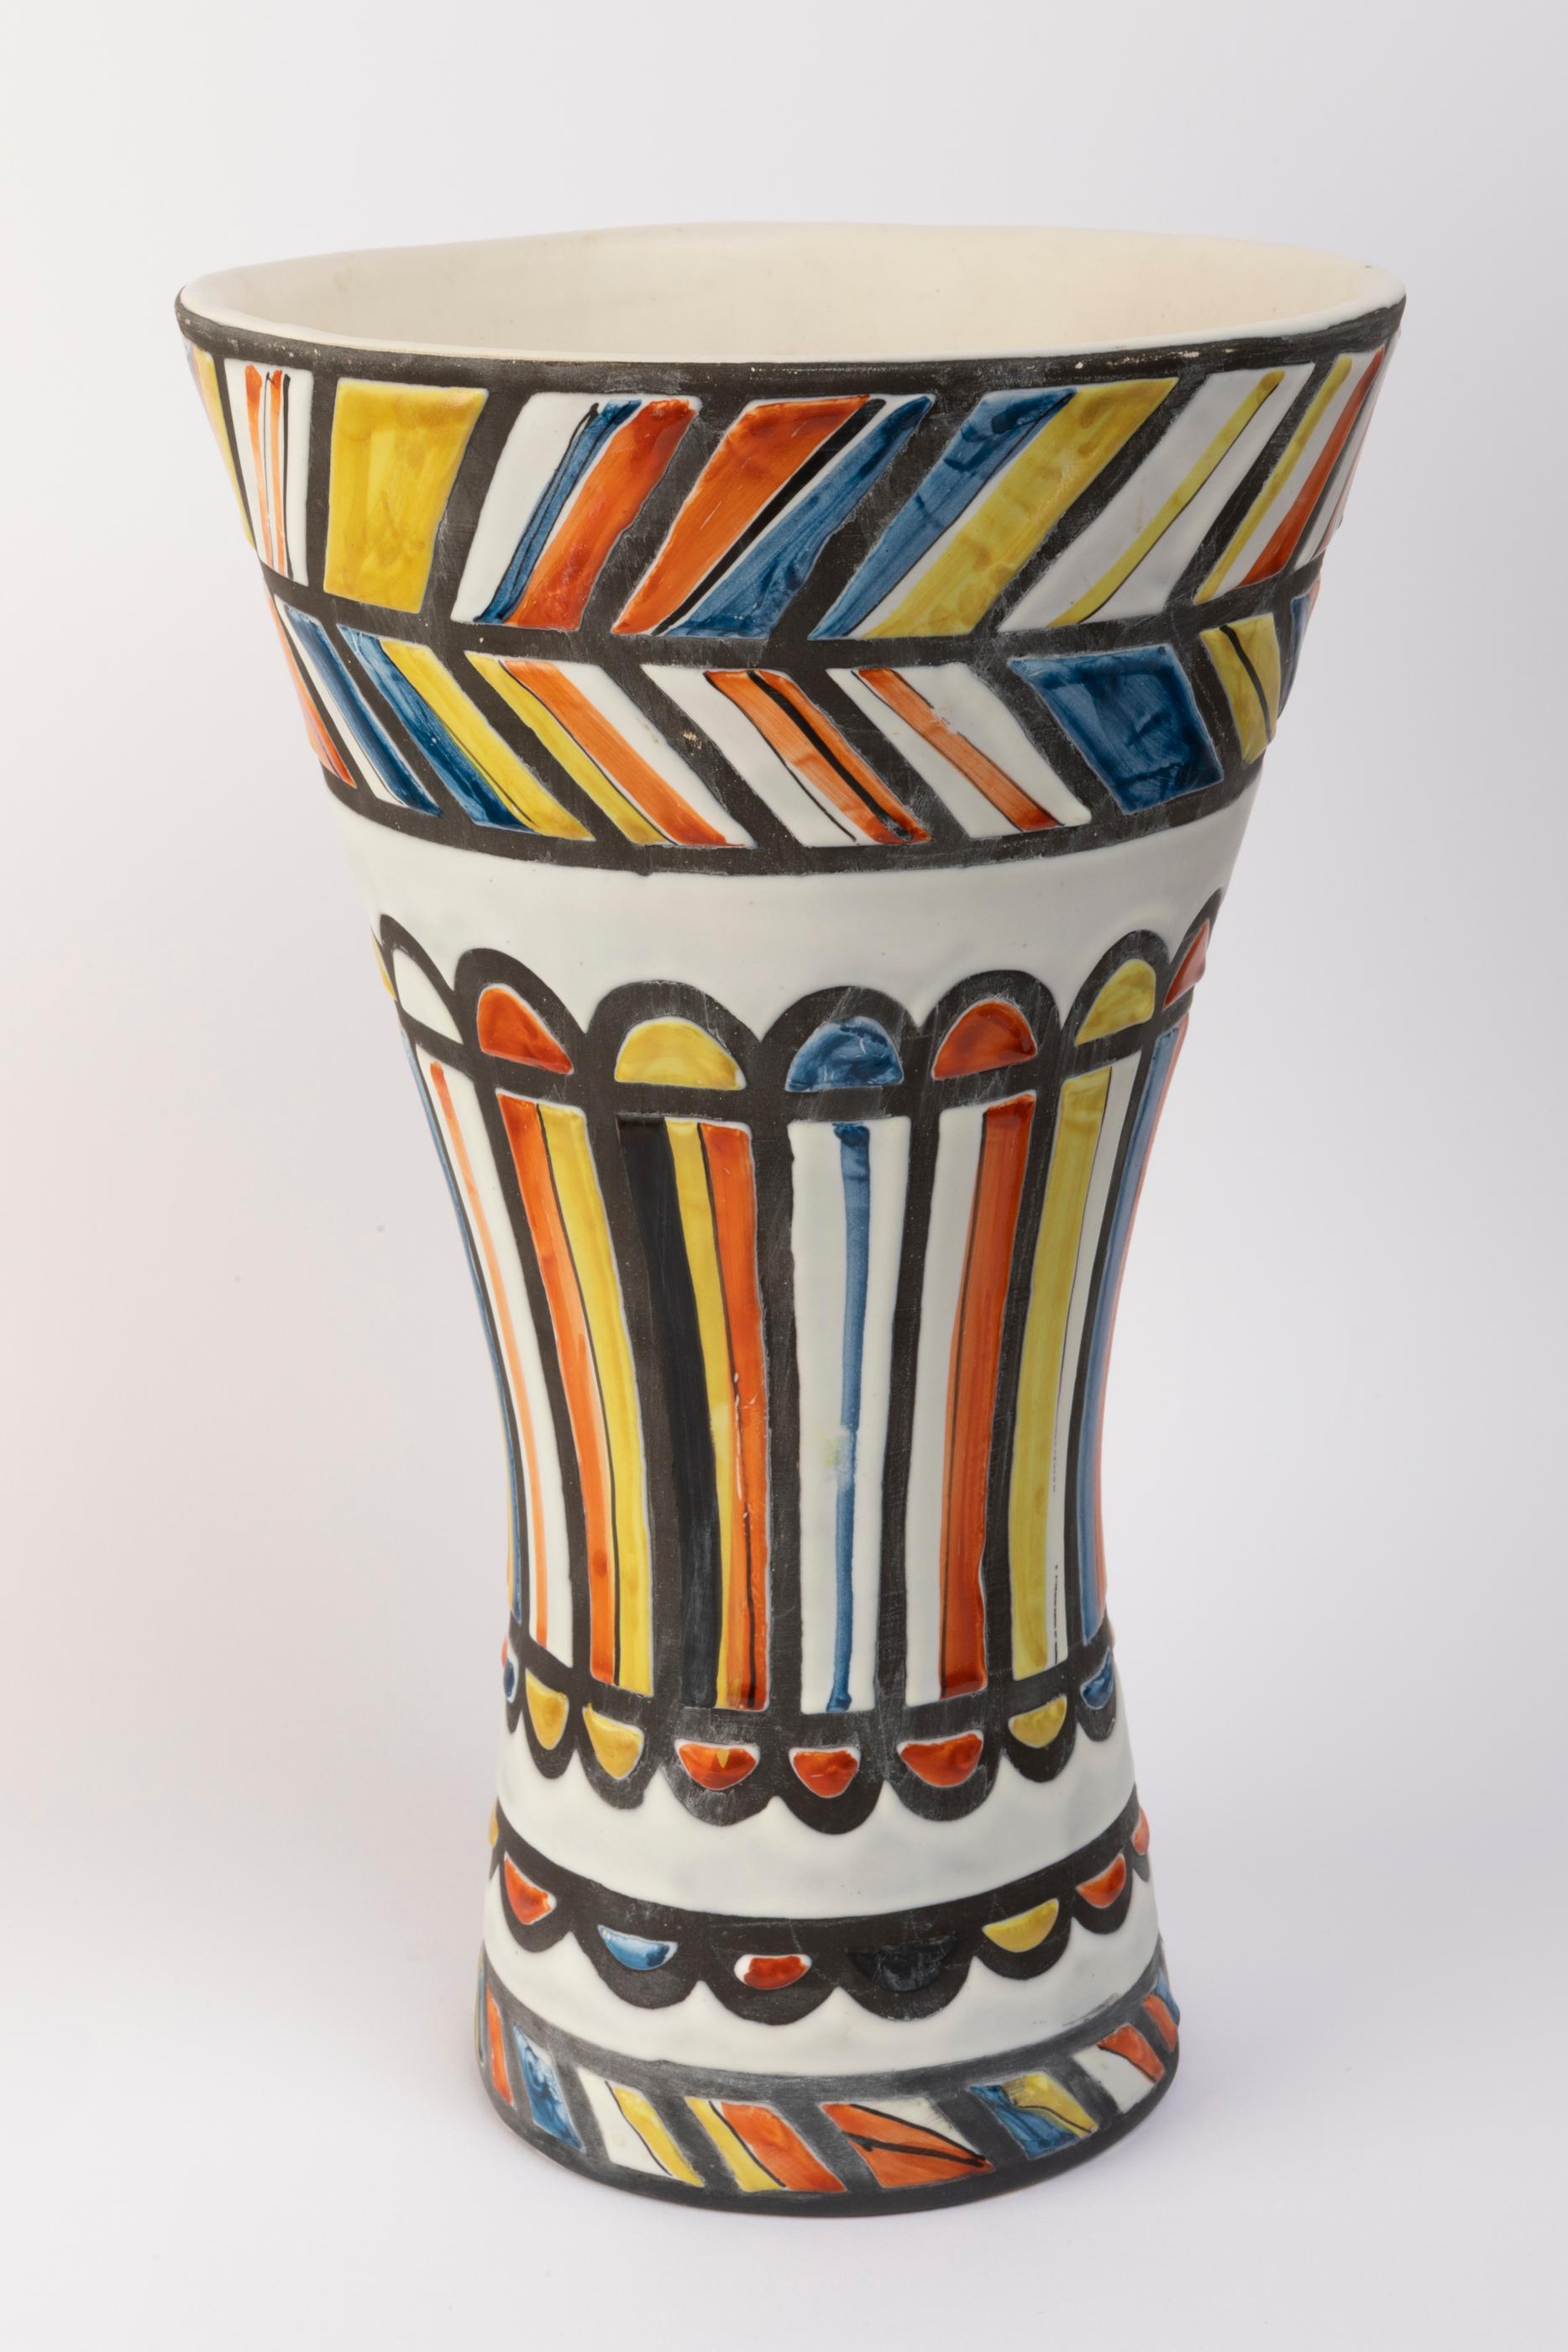 Large ceramic vase
Glazed ceramic with blue, red and yellow decoration.
Signed underneath : Capron Vallauris
France, Vallauris, circa 1960s.

Measures: Height 31 cm - 12.2 in.
Diameter 19 cm - 7.5 in.